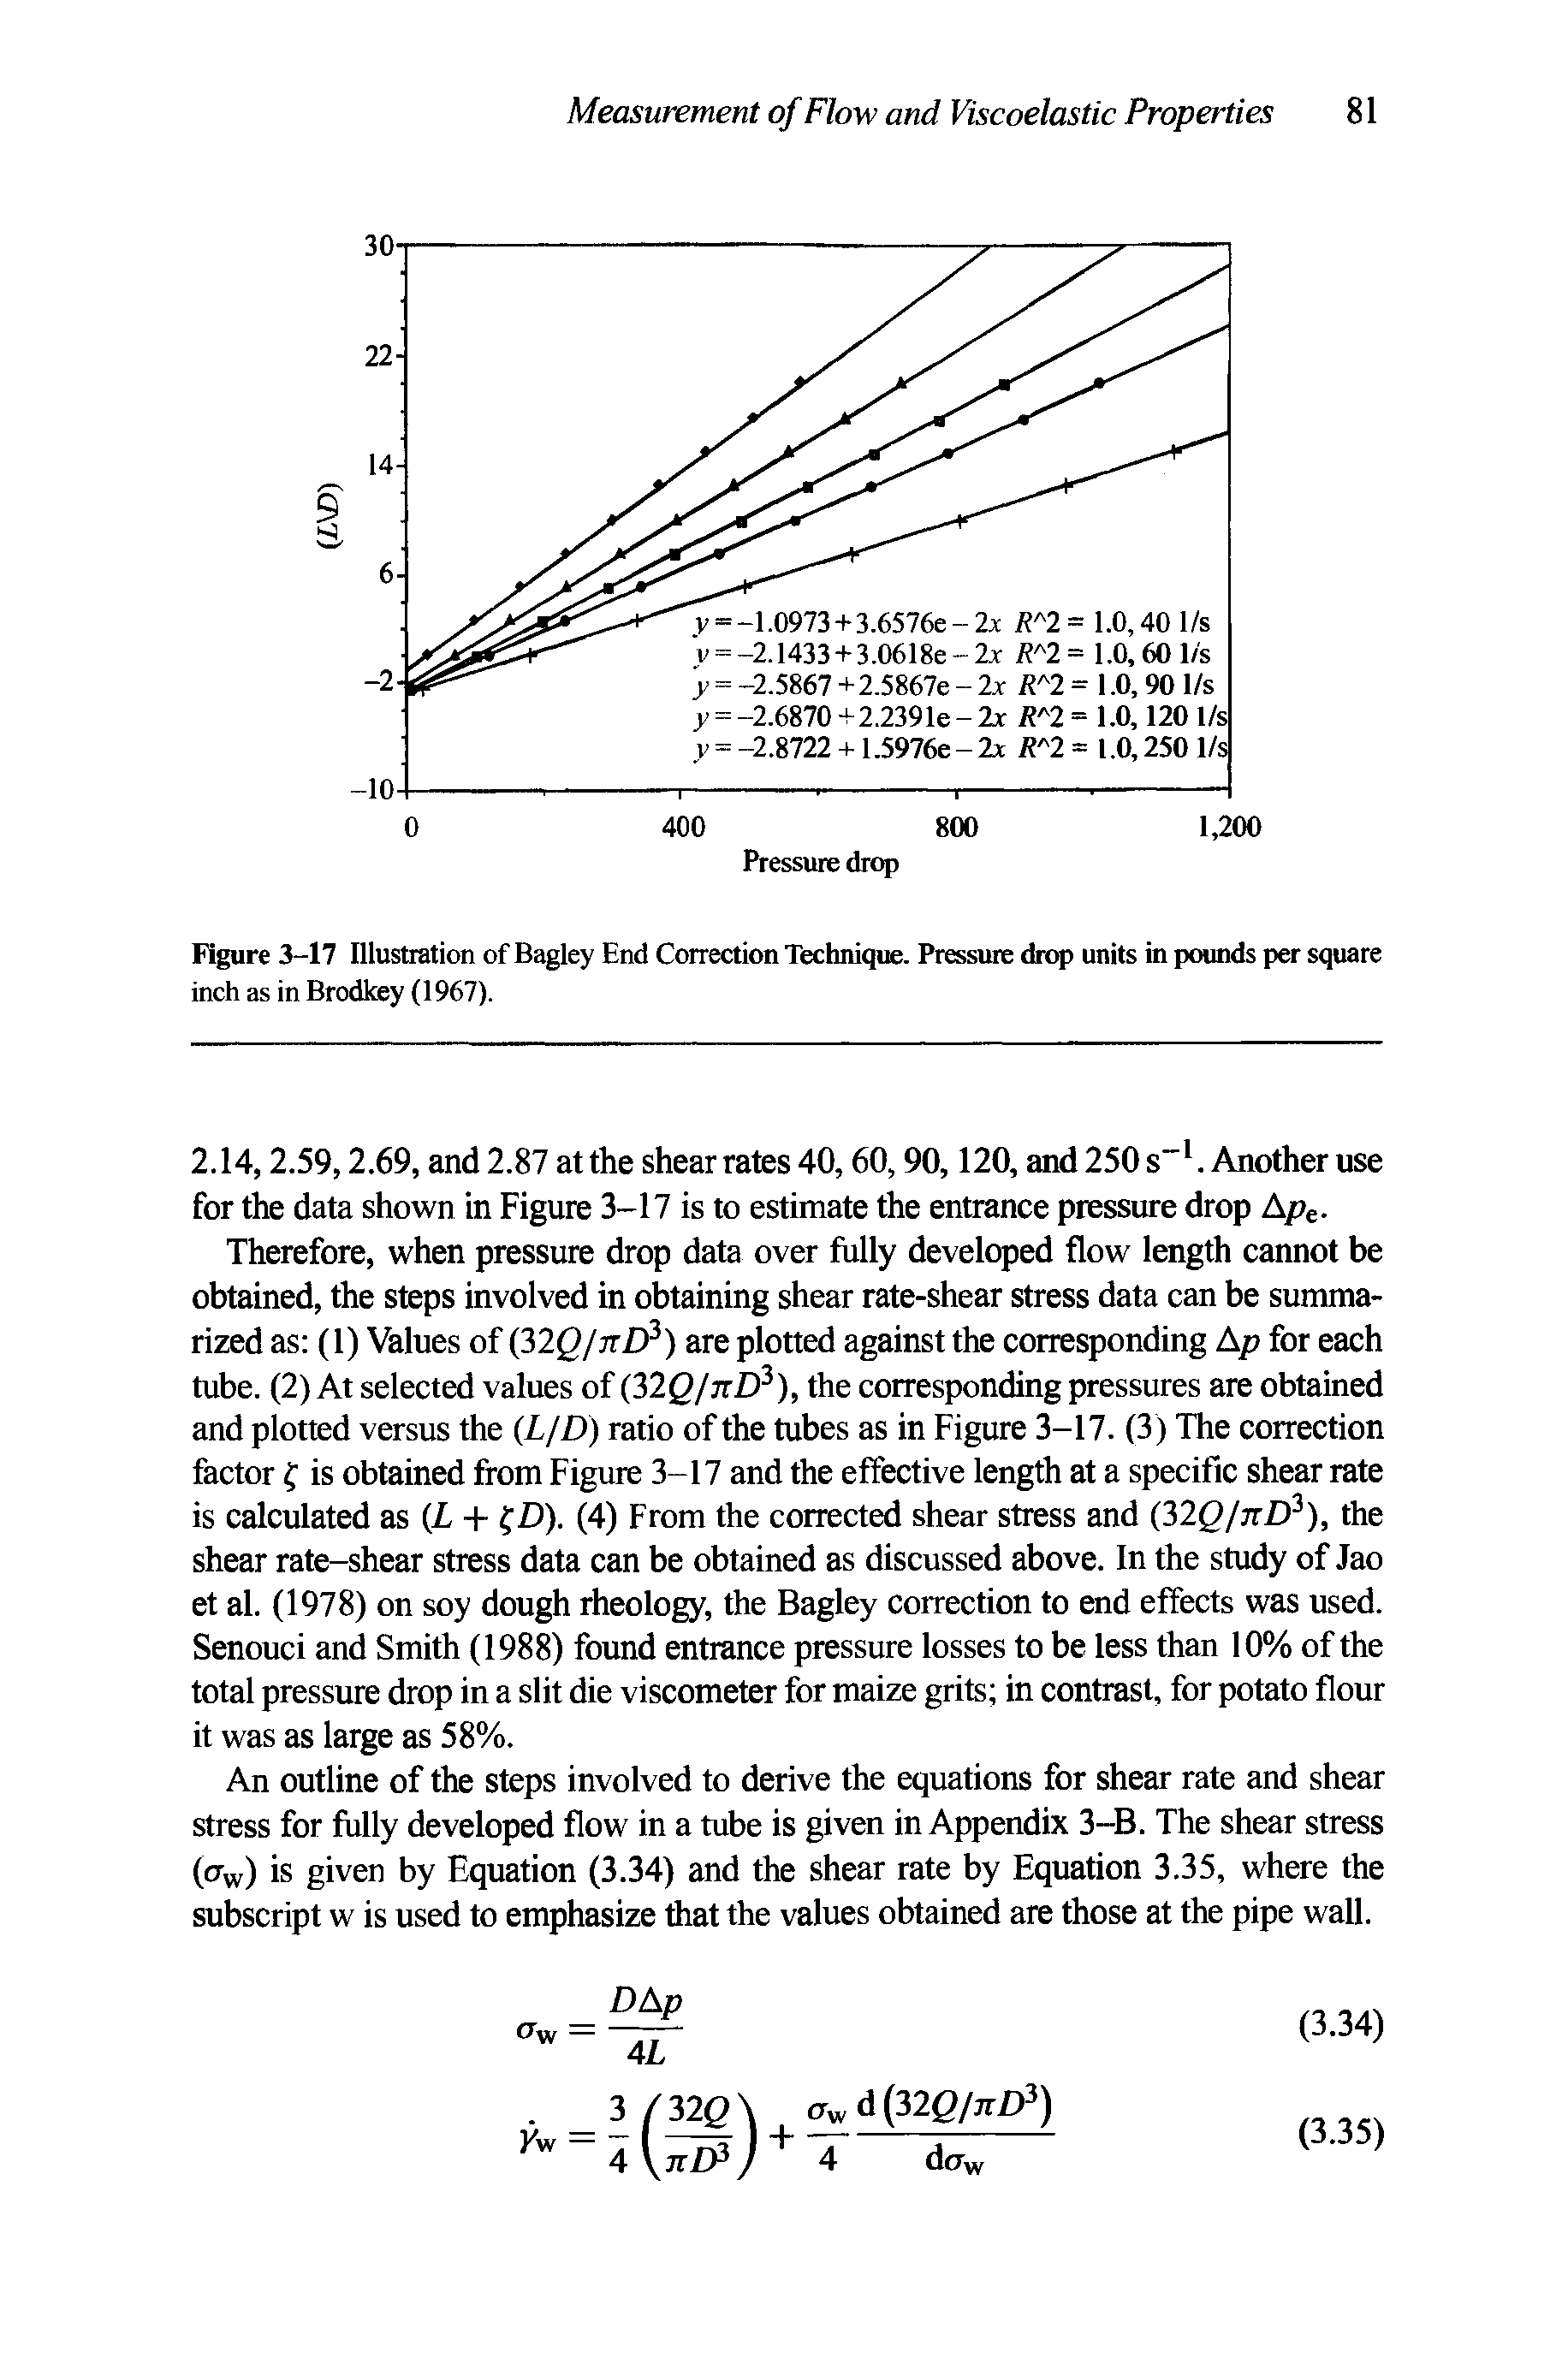 Figure 3-17 Illustration of Bagley End Correction Technique. Pressure drop units in pounds per square inch as in Brodkey (1967).